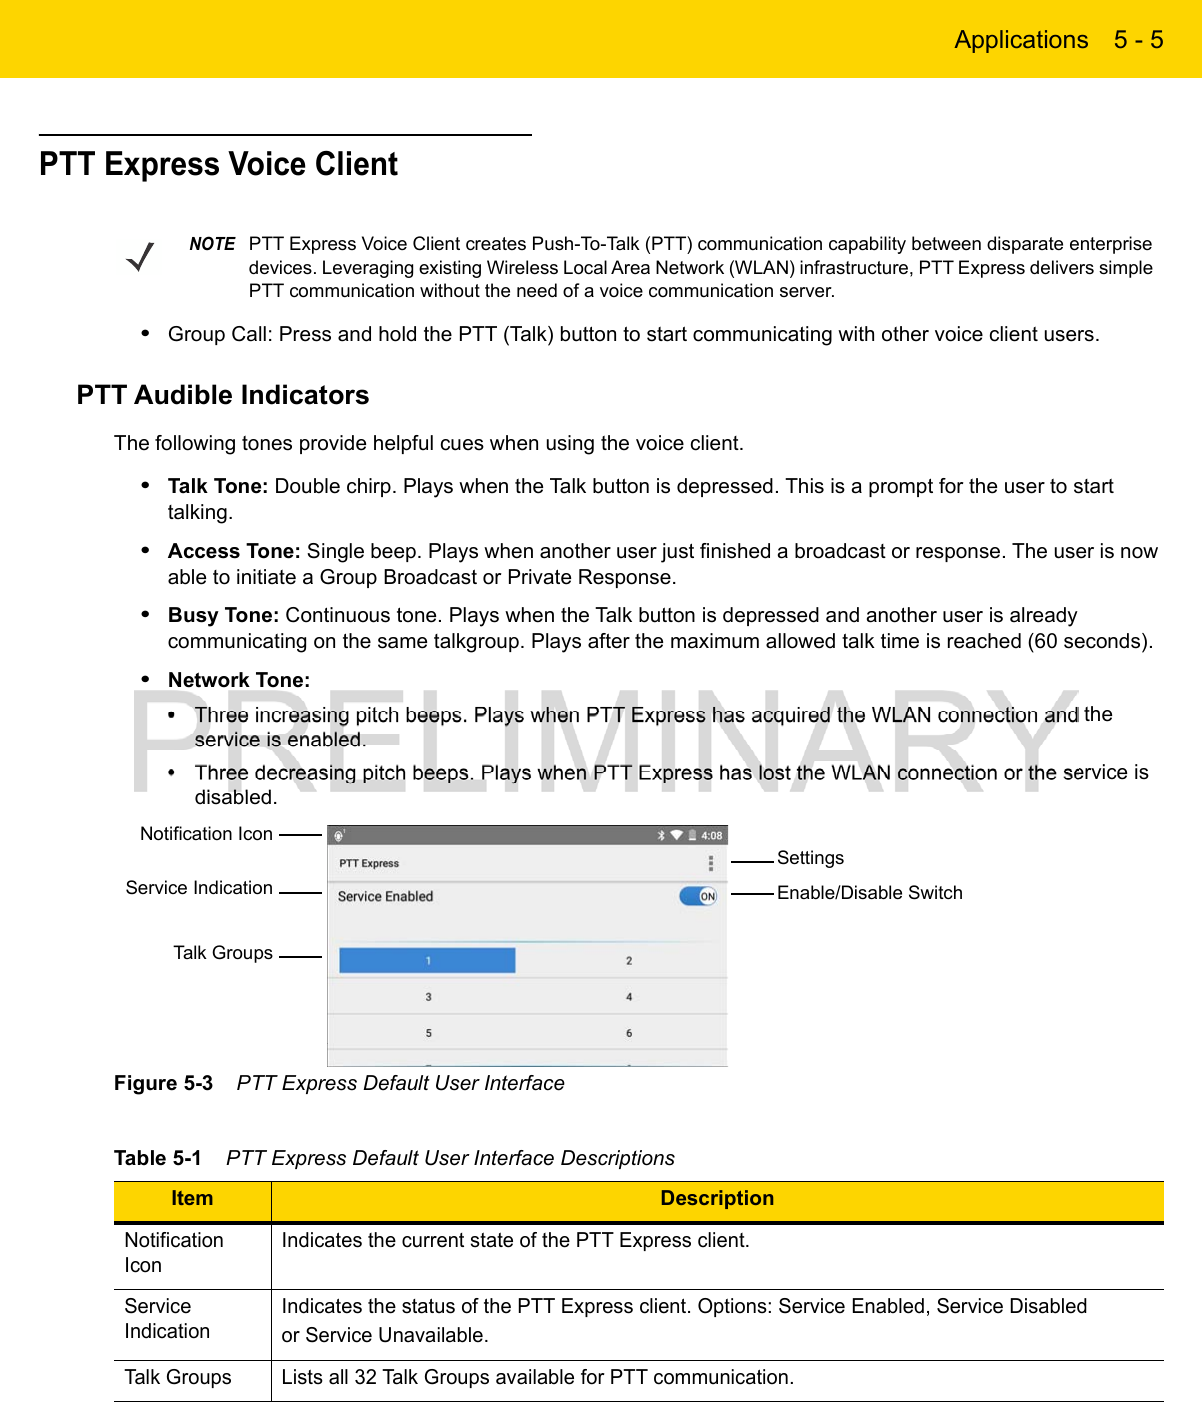 Applications 5 - 5PTT Express Voice Client•Group Call: Press and hold the PTT (Talk) button to start communicating with other voice client users.PTT Audible IndicatorsThe following tones provide helpful cues when using the voice client.•Talk Tone: Double chirp. Plays when the Talk button is depressed. This is a prompt for the user to start talking.•Access Tone: Single beep. Plays when another user just finished a broadcast or response. The user is now able to initiate a Group Broadcast or Private Response.•Busy Tone: Continuous tone. Plays when the Talk button is depressed and another user is already communicating on the same talkgroup. Plays after the maximum allowed talk time is reached (60 seconds).•Network Tone:•Three increasing pitch beeps. Plays when PTT Express has acquired the WLAN connection and the service is enabled.•Three decreasing pitch beeps. Plays when PTT Express has lost the WLAN connection or the service is disabled.Figure 5-3    PTT Express Default User InterfaceNOTEPTT Express Voice Client creates Push-To-Talk (PTT) communication capability between disparate enterprise devices. Leveraging existing Wireless Local Area Network (WLAN) infrastructure, PTT Express delivers simple PTT communication without the need of a voice communication server.Table 5-1    PTT Express Default User Interface DescriptionsItem DescriptionNotification IconIndicates the current state of the PTT Express client.Service IndicationIndicates the status of the PTT Express client. Options: Service Enabled, Service Disabledor Service Unavailable.Talk Groups Lists all 32 Talk Groups available for PTT communication.SettingsEnable/Disable SwitchNotification IconService IndicationTalk Groups